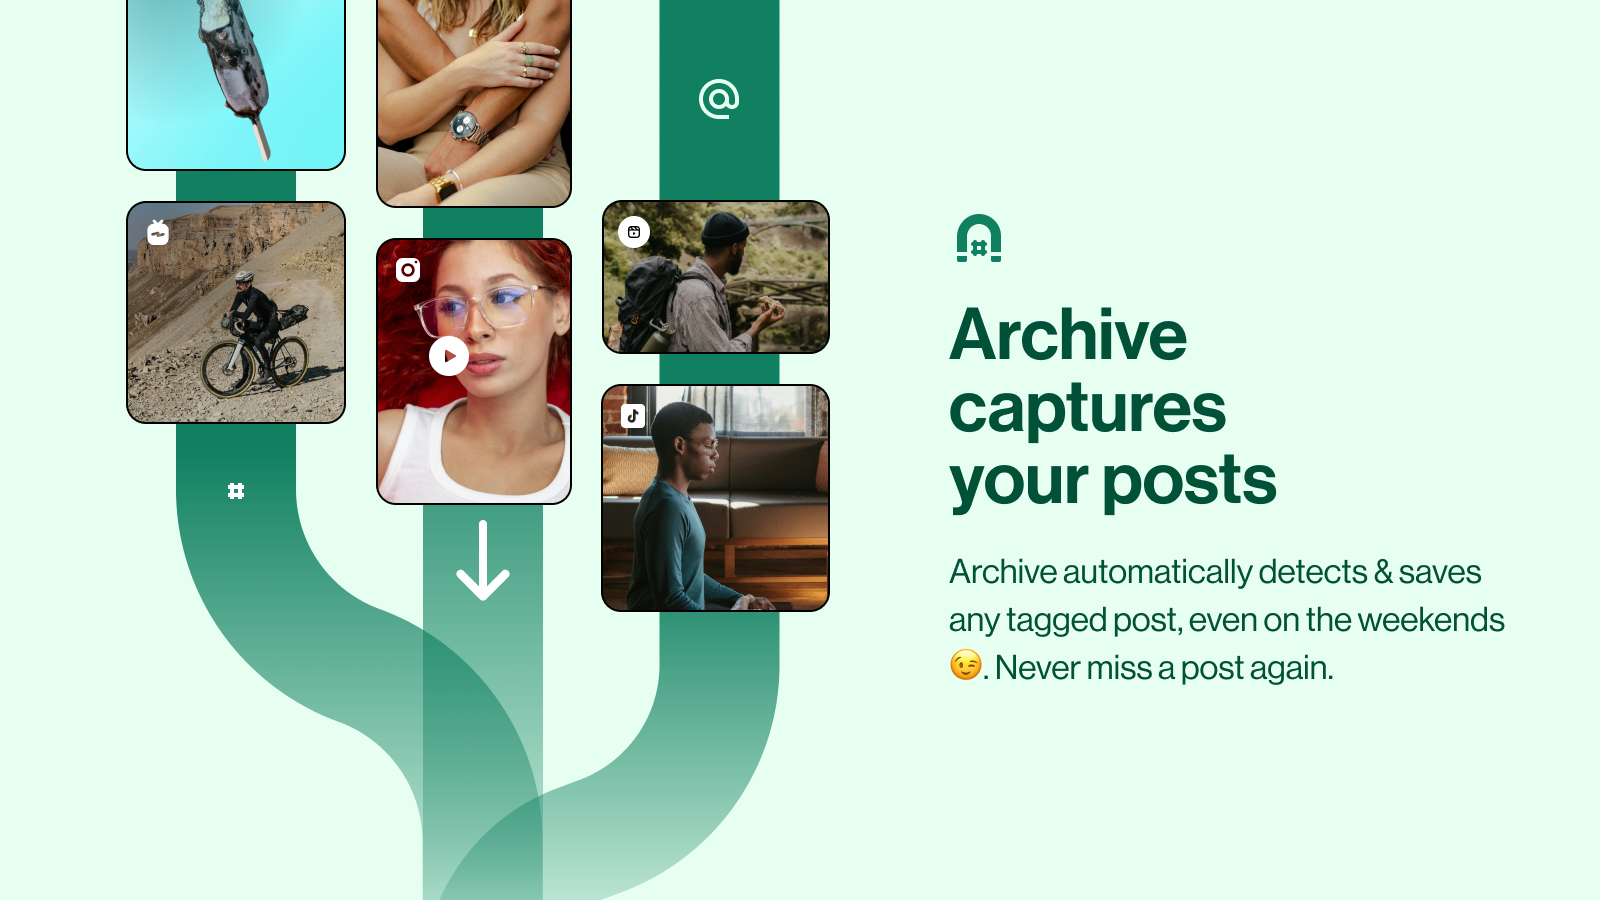 Archive automatically detects & displays any tagged post.